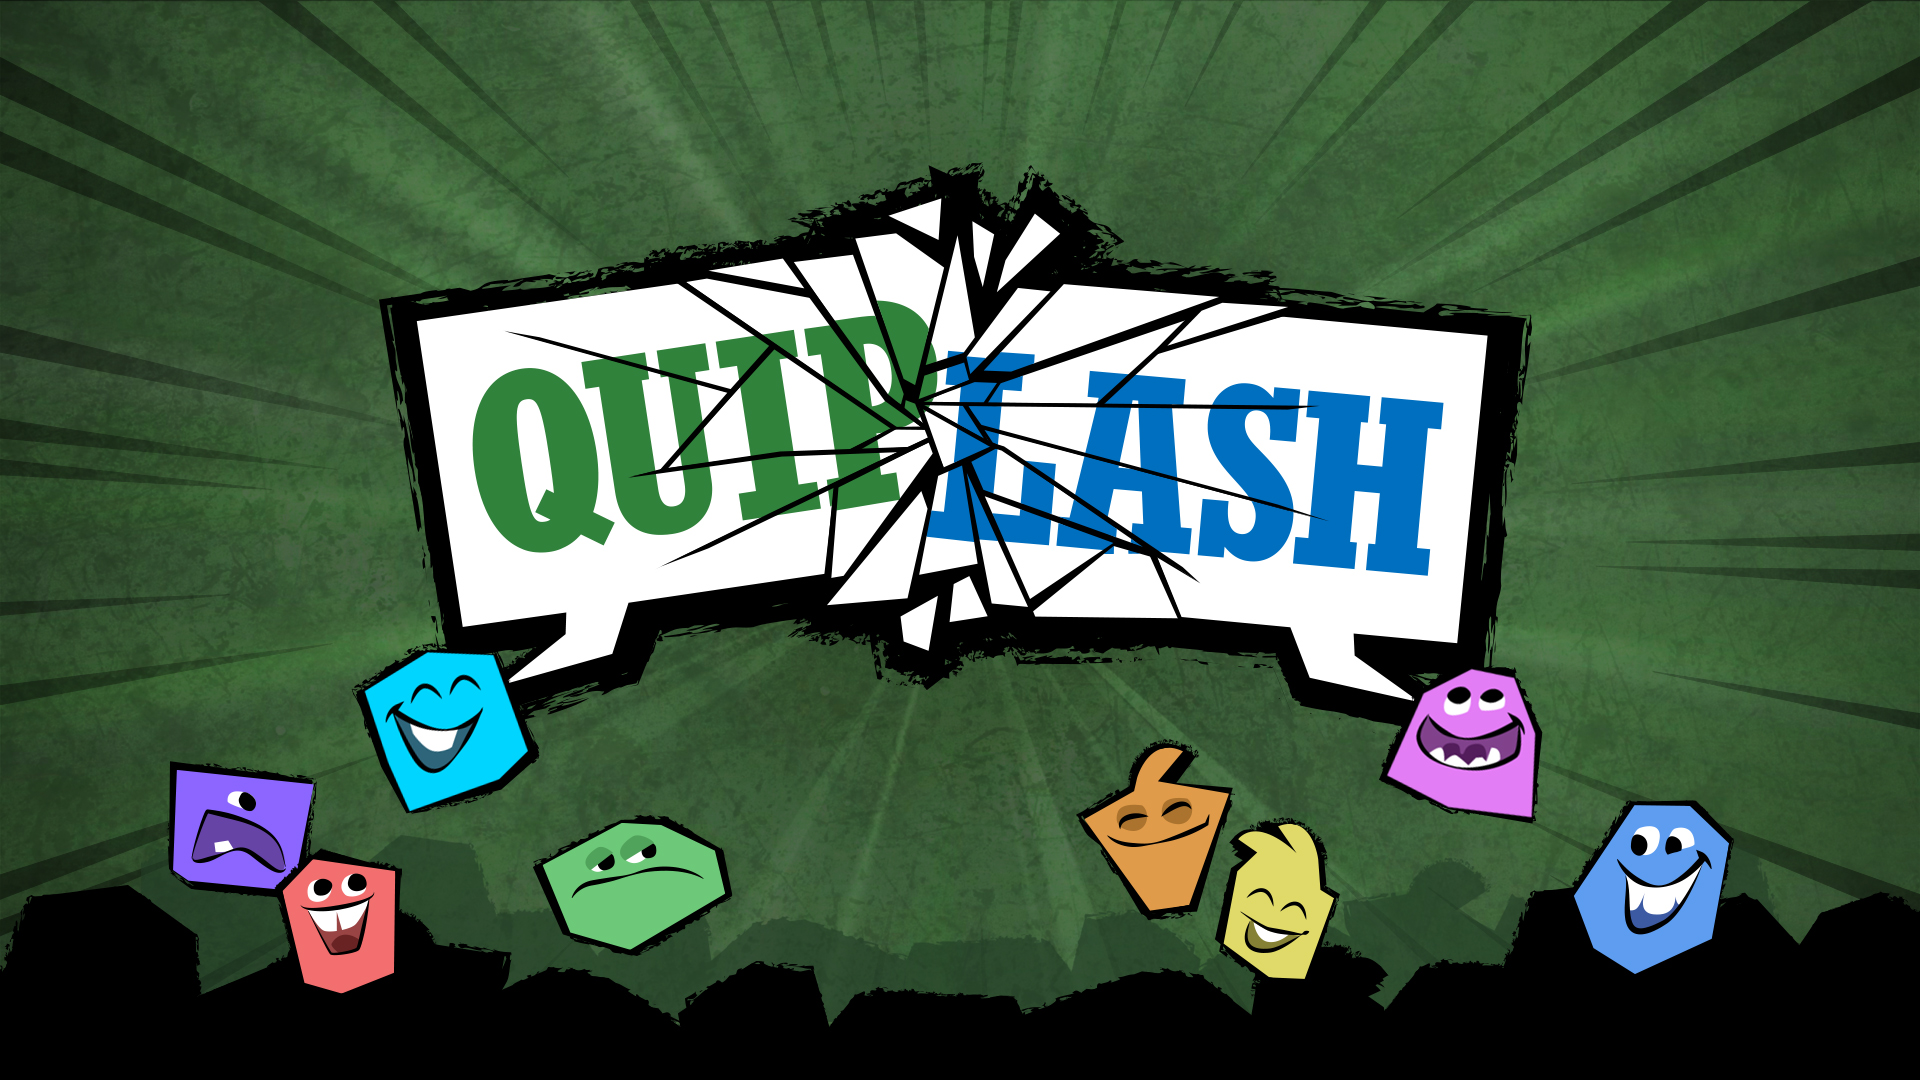 most offensive quiplash answers